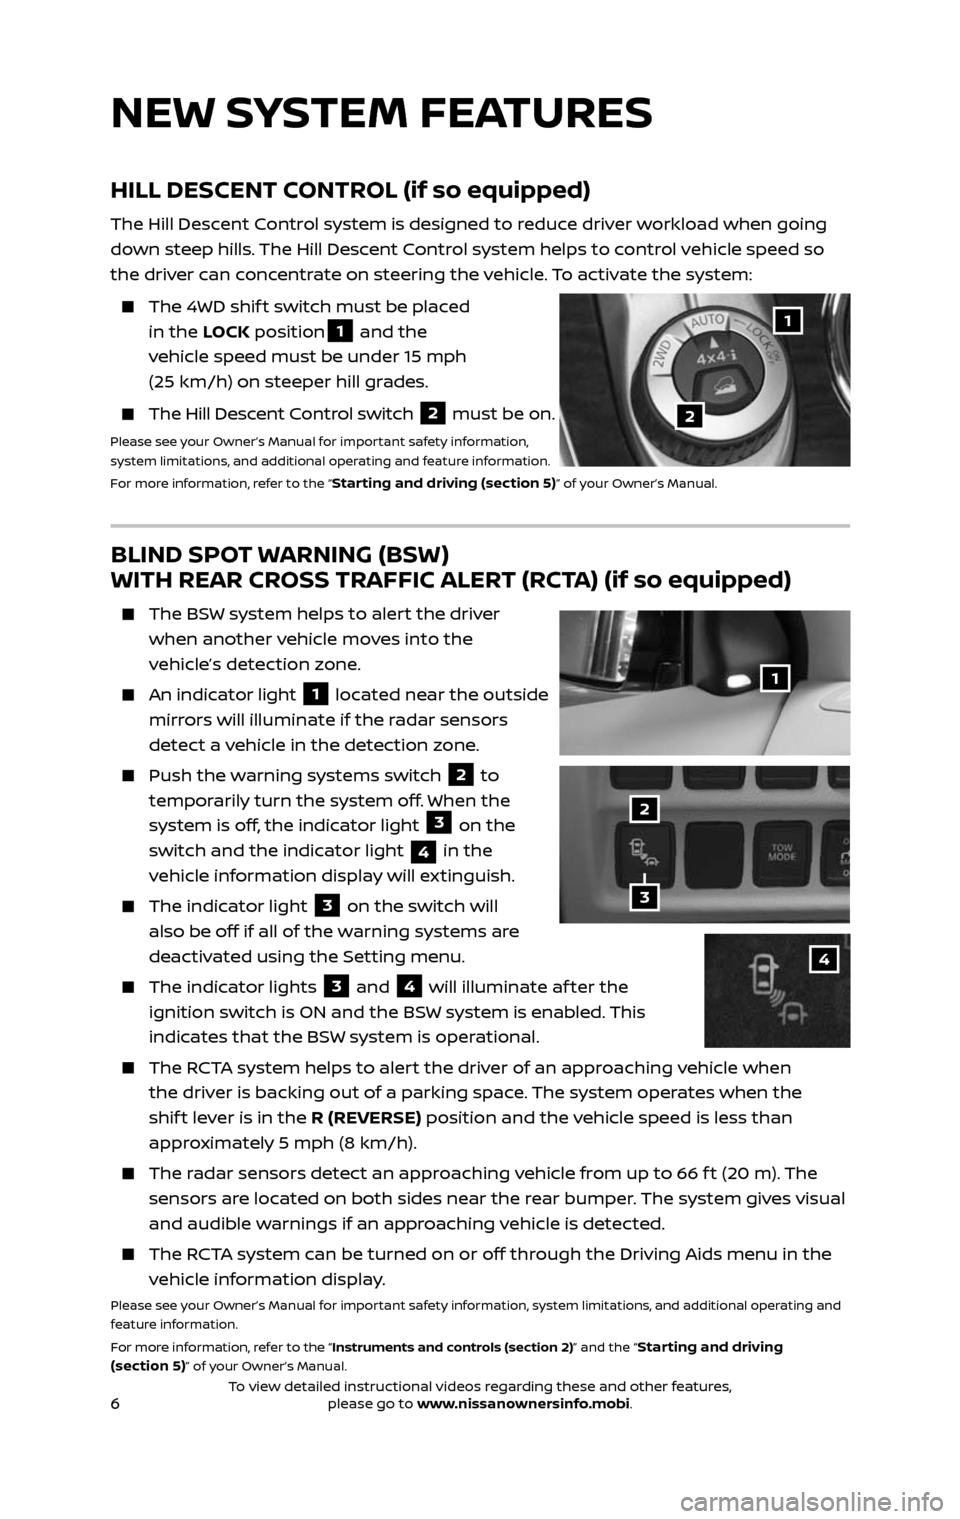 NISSAN PATHFINDER 2017 R52 / 4.G Quick Reference Guide 6
BLIND SPOT WARNING (BSW)  
WITH REAR CROSS TRAFFIC ALERT (RCTA) (if so equipped)
    The BSW system helps to alert the driver 
when another vehicle moves into the 
vehicle’s detection zone.
    An